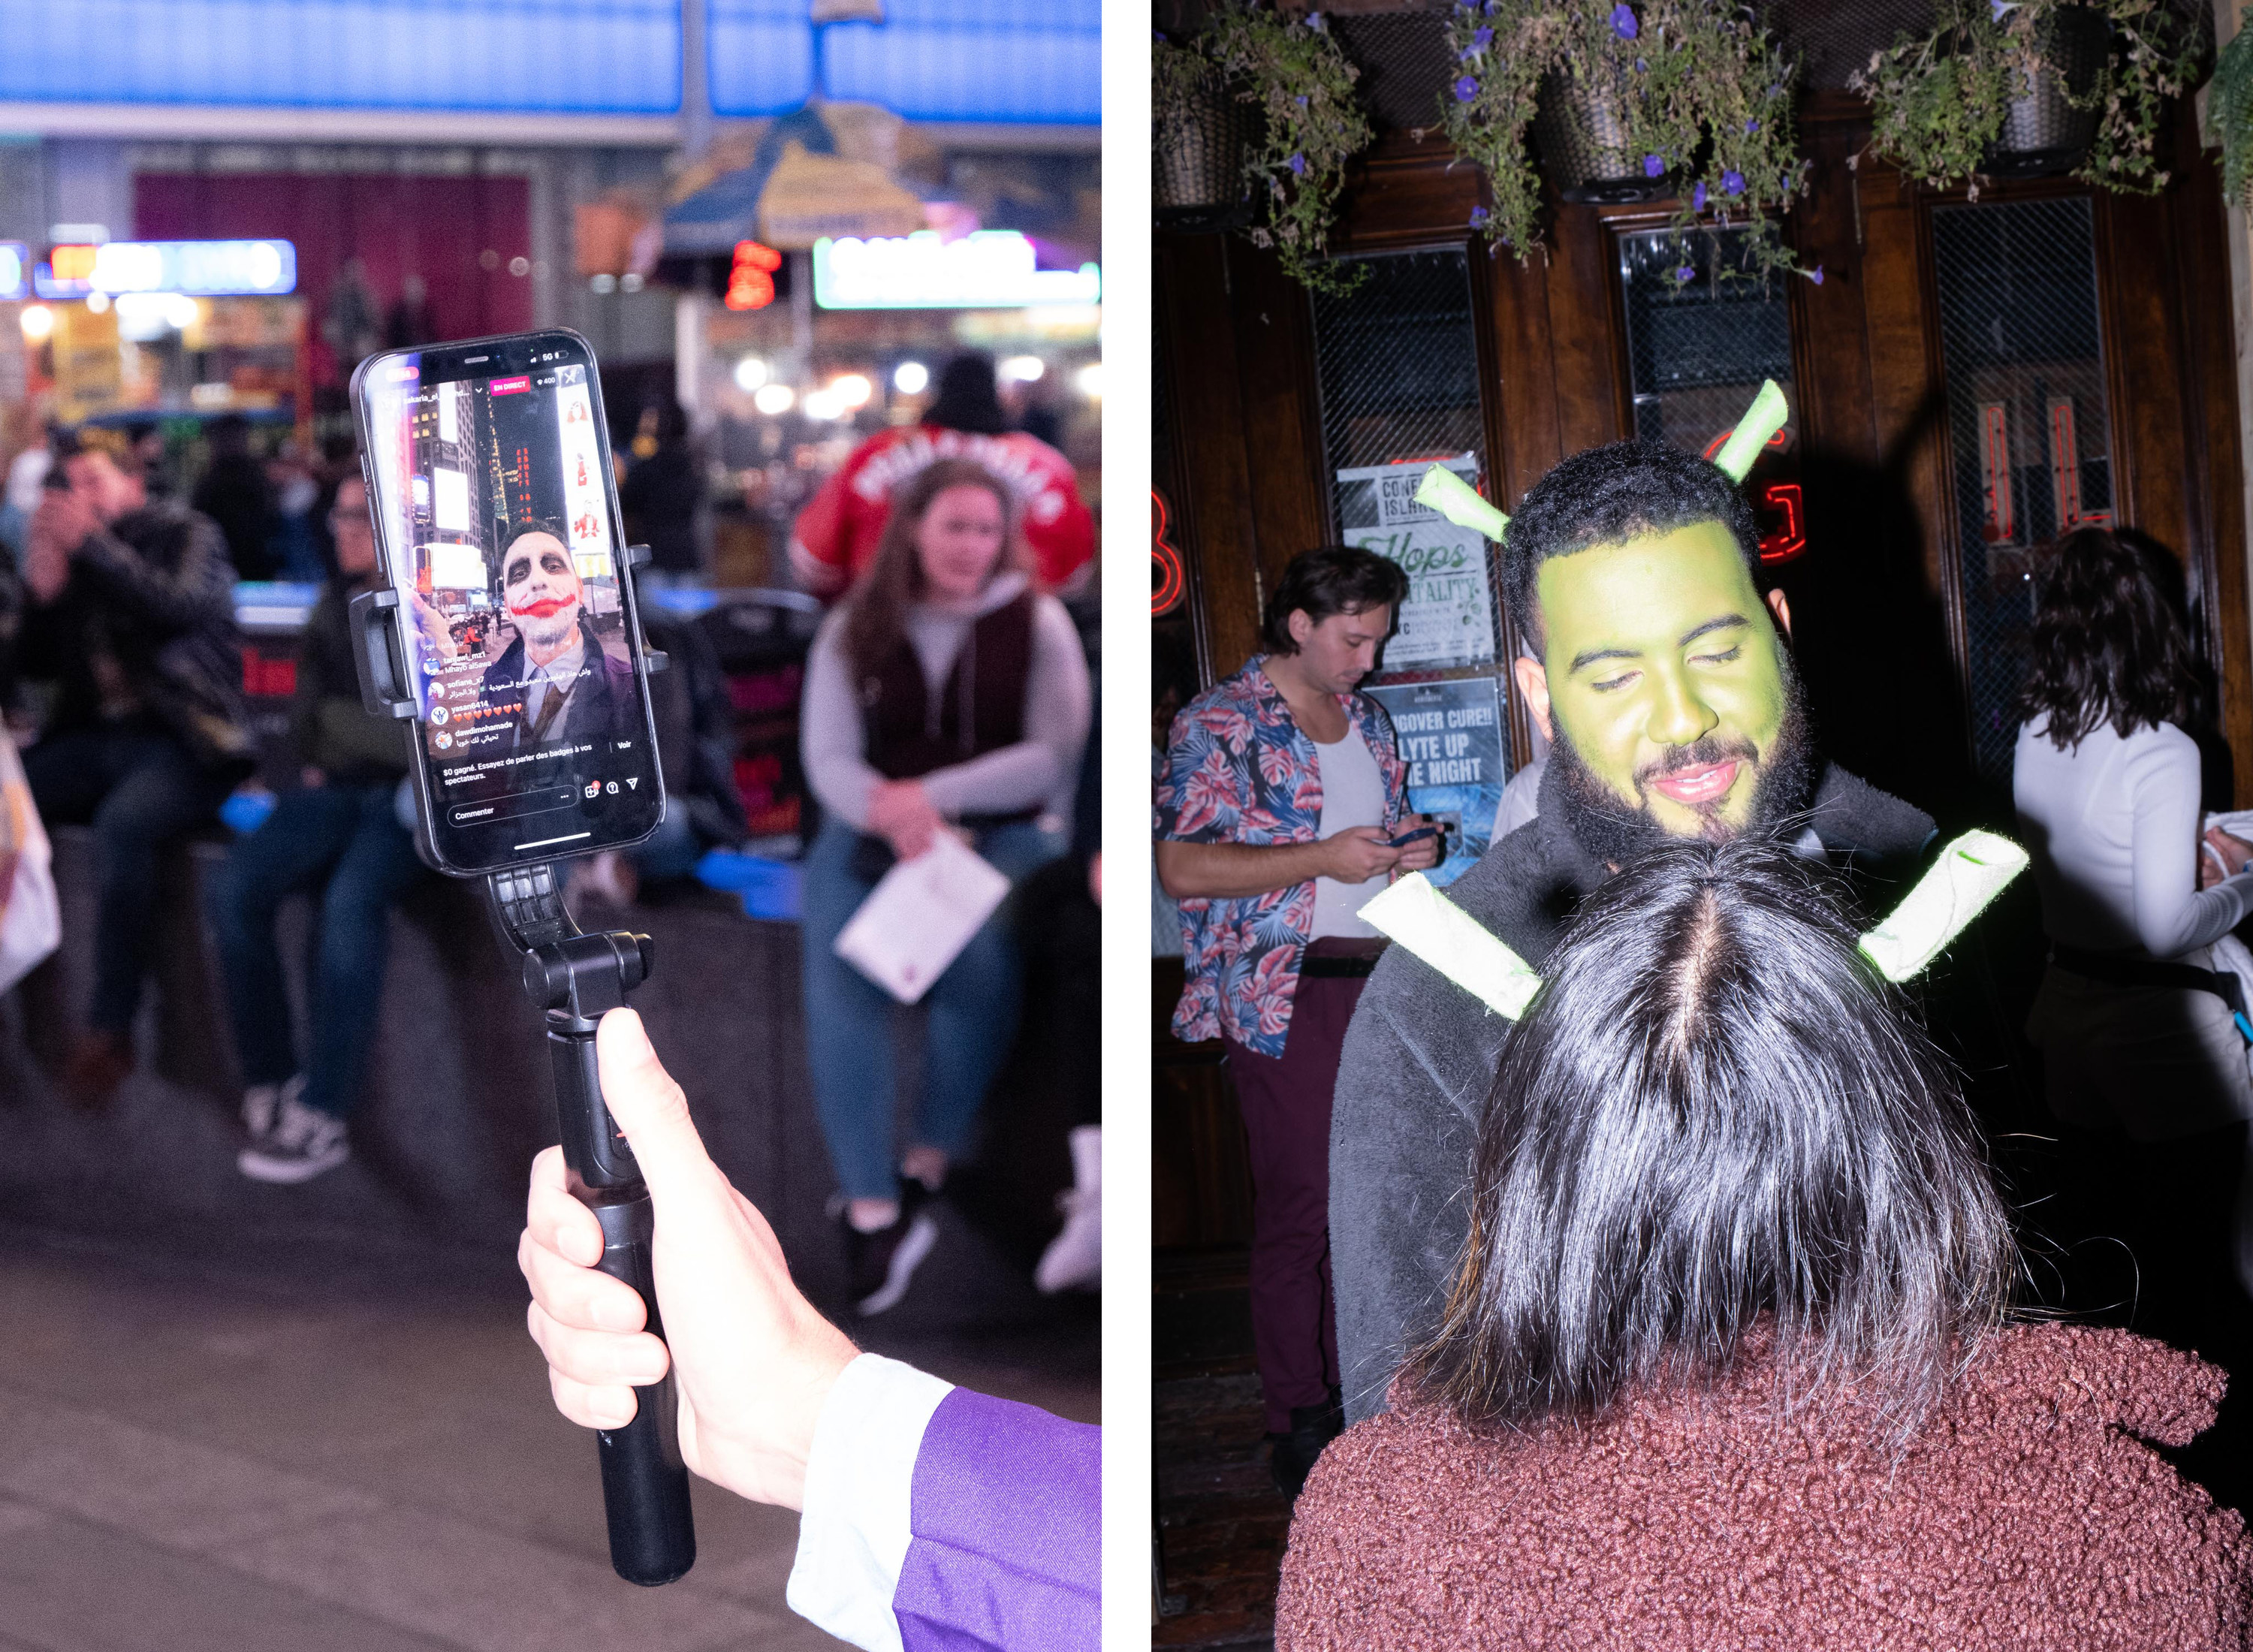 Left, a hand holding a phone live streaming a man dressed like the joker, right a man dressed as shrek looking lovingly at his partner